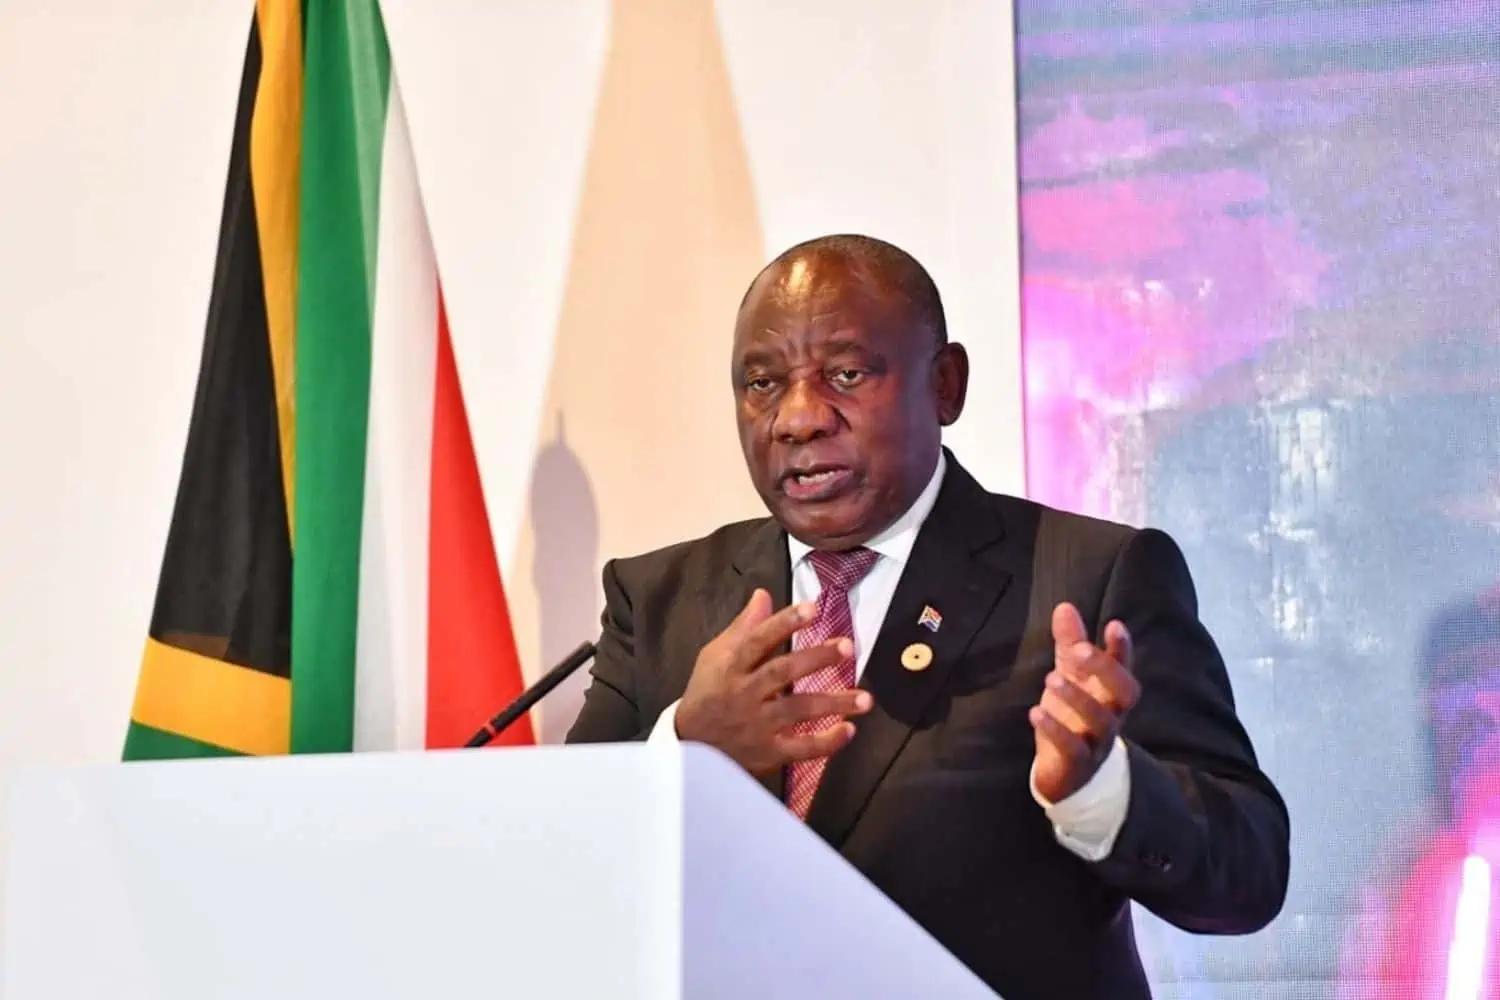 Here are the 2022 recommended salary increases for Ramaphosa and Cabinet